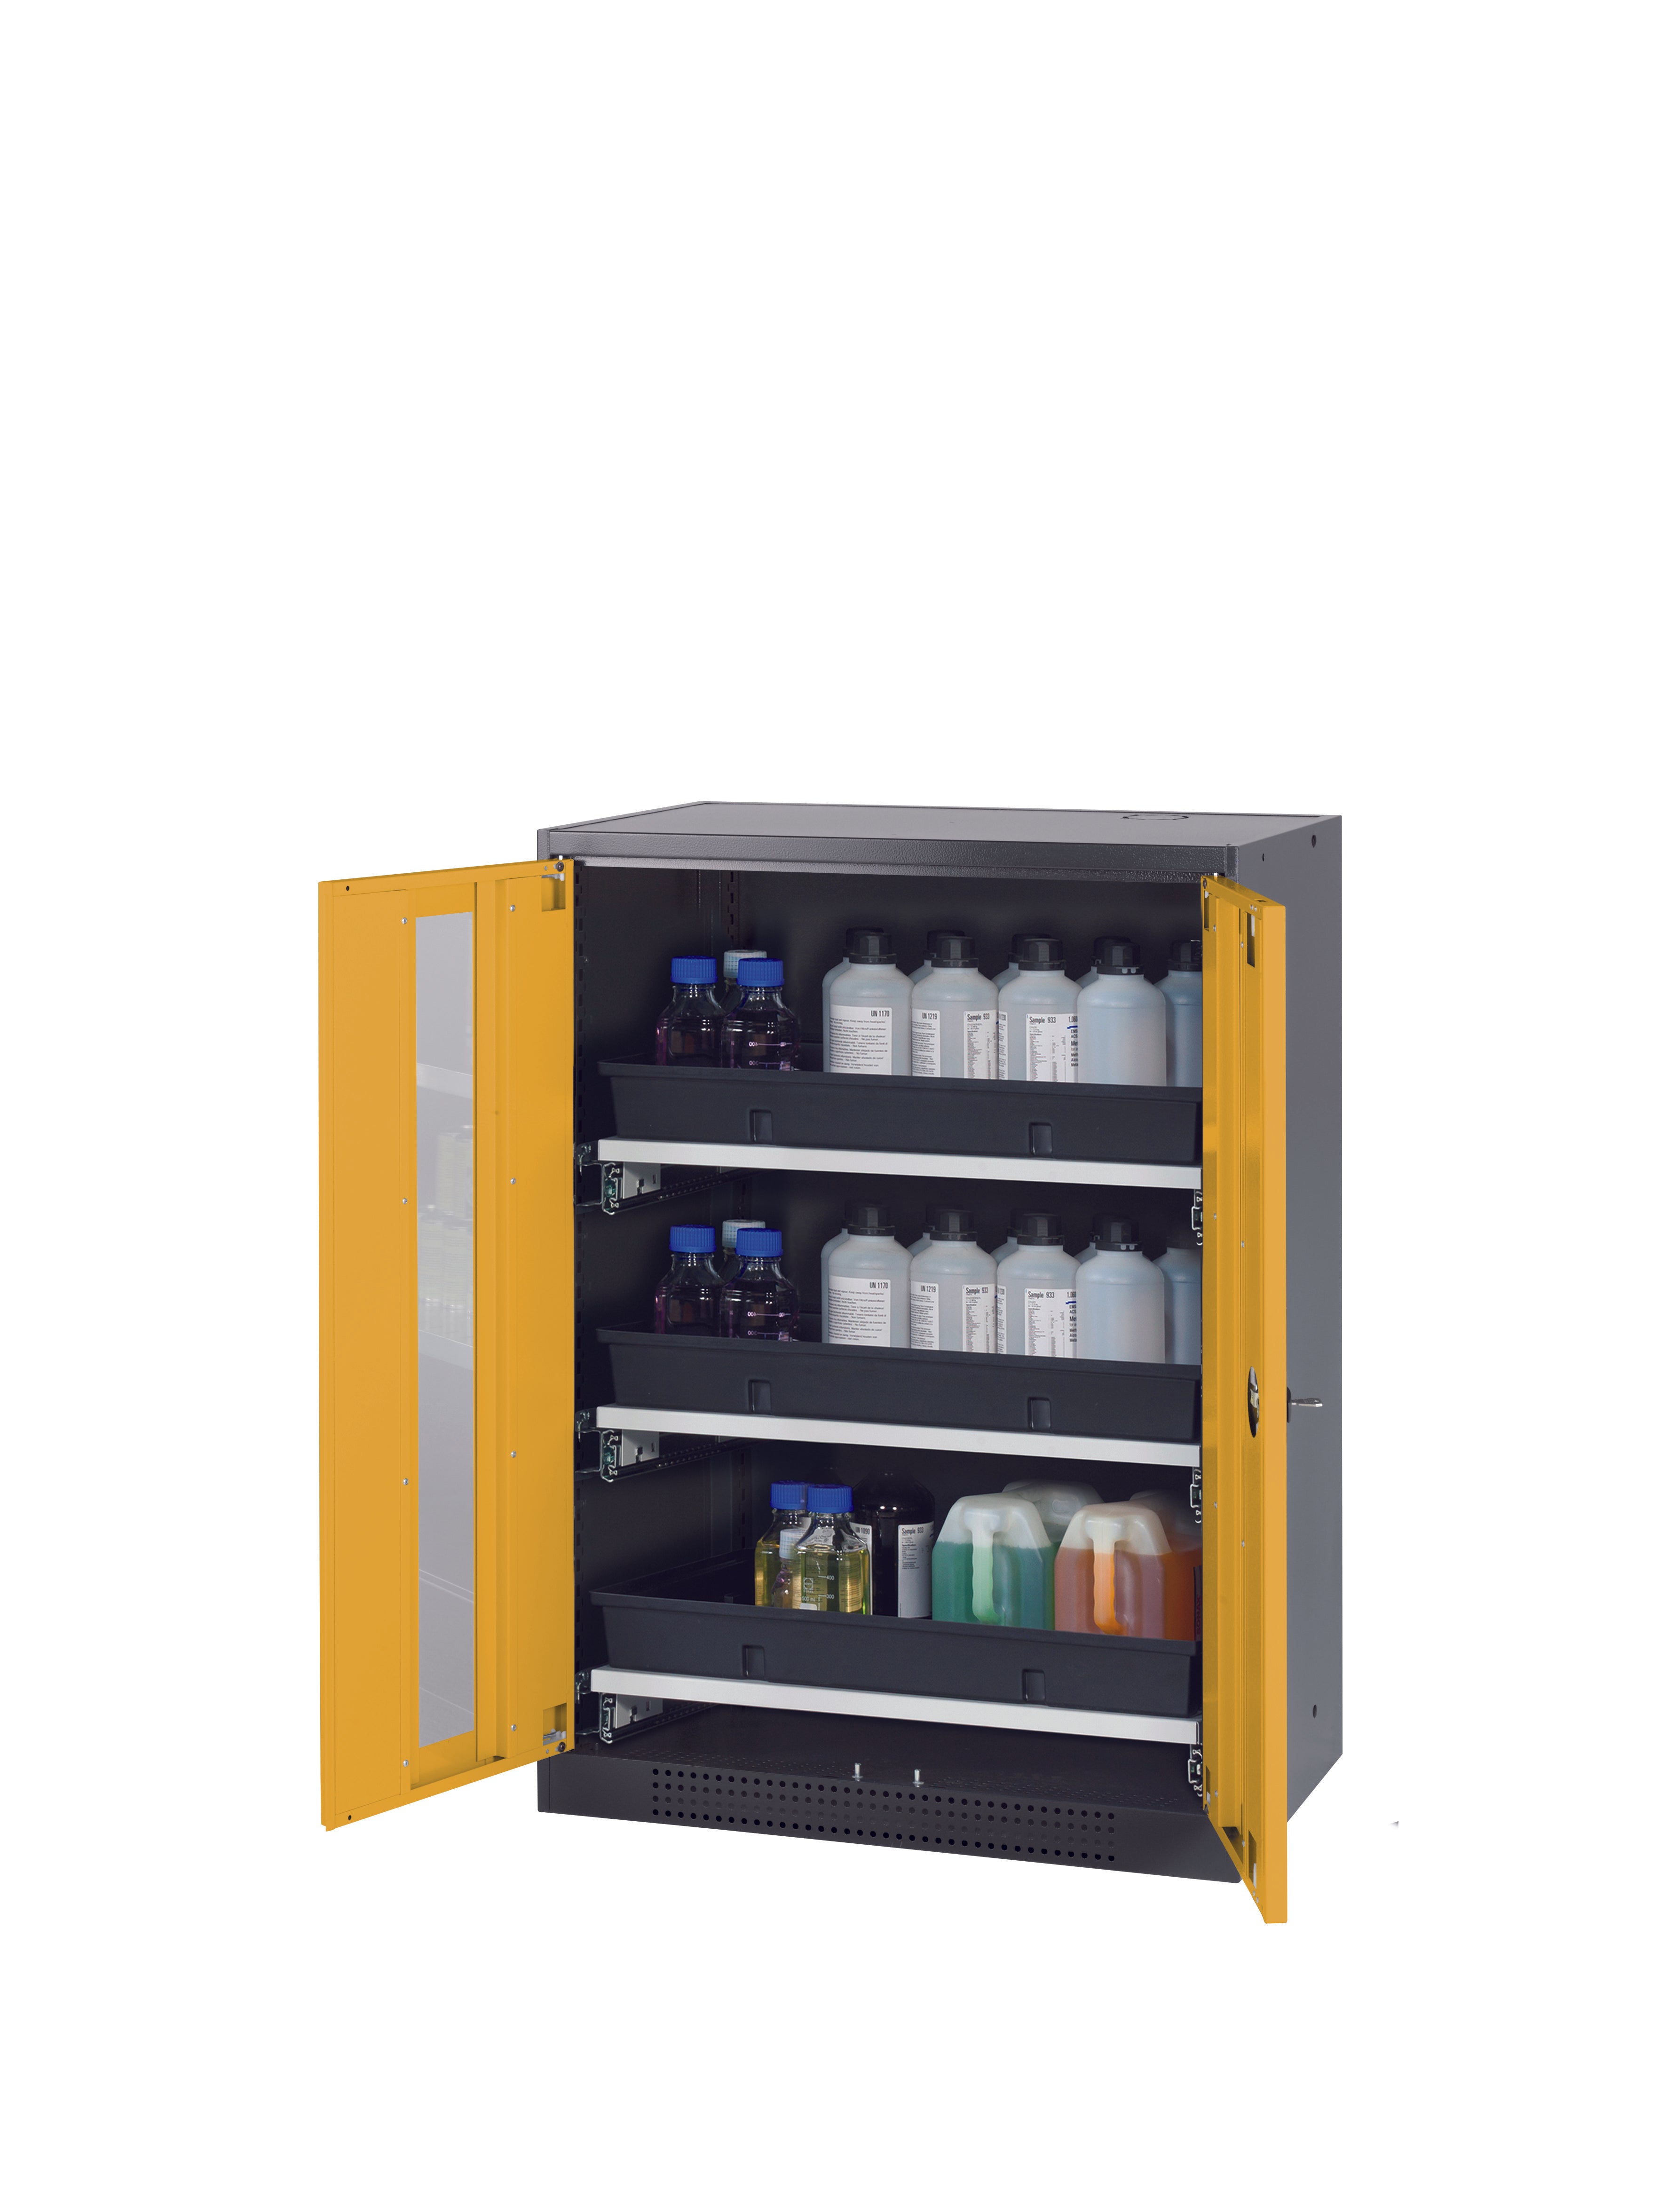 Chemical cabinet CS-CLASSIC-G model CS.110.081.WDFW in safety yellow RAL 1004 with 3x AbZ pull-out shelves (sheet steel/polypropylene)